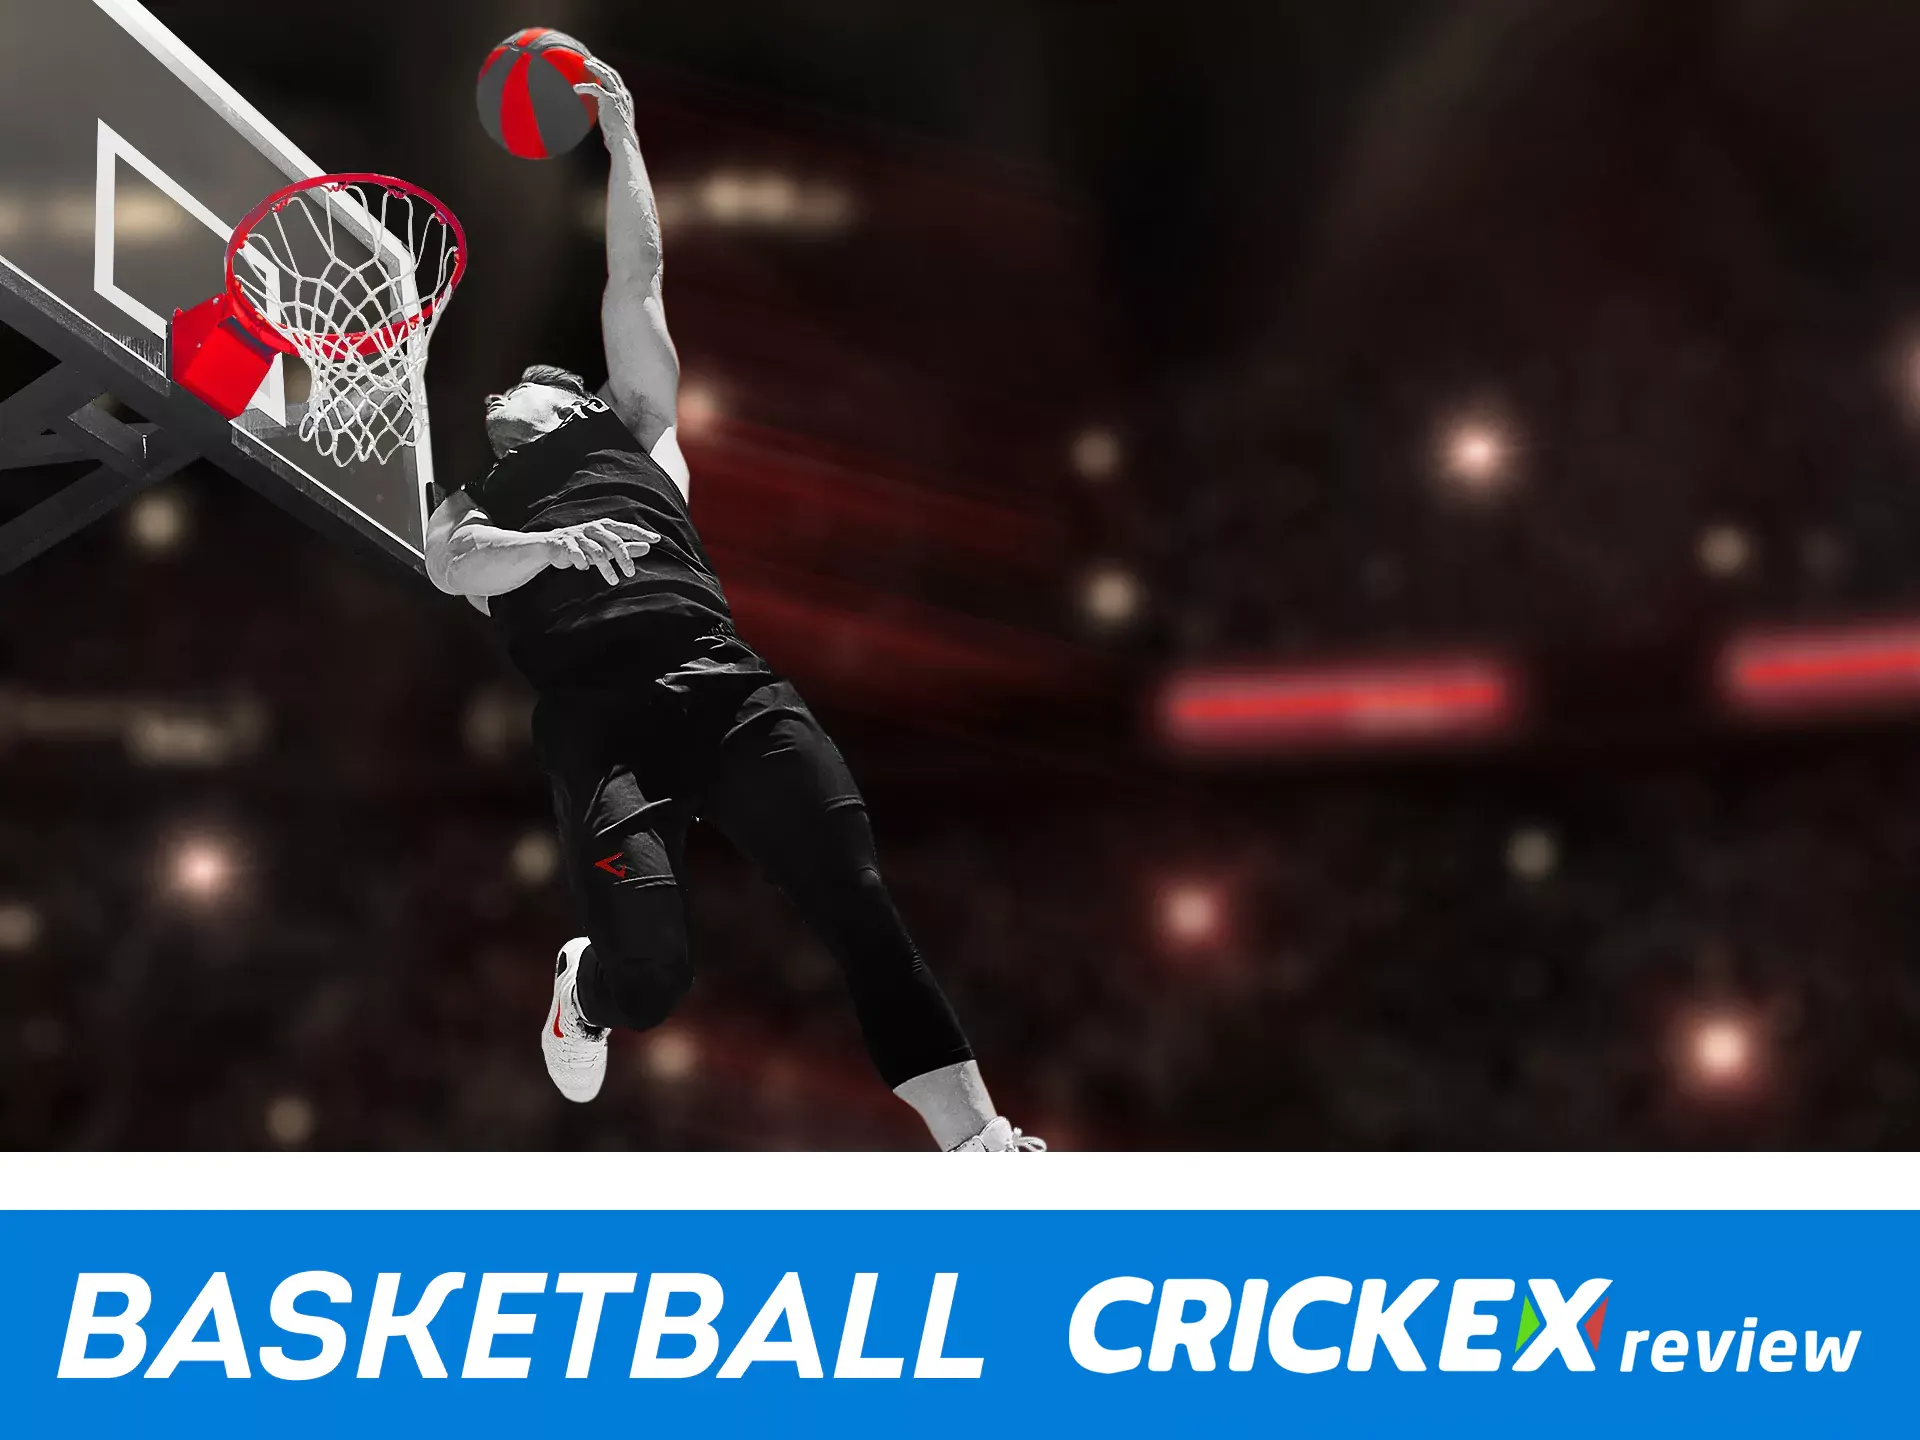 Bet on basketball with Crickex.